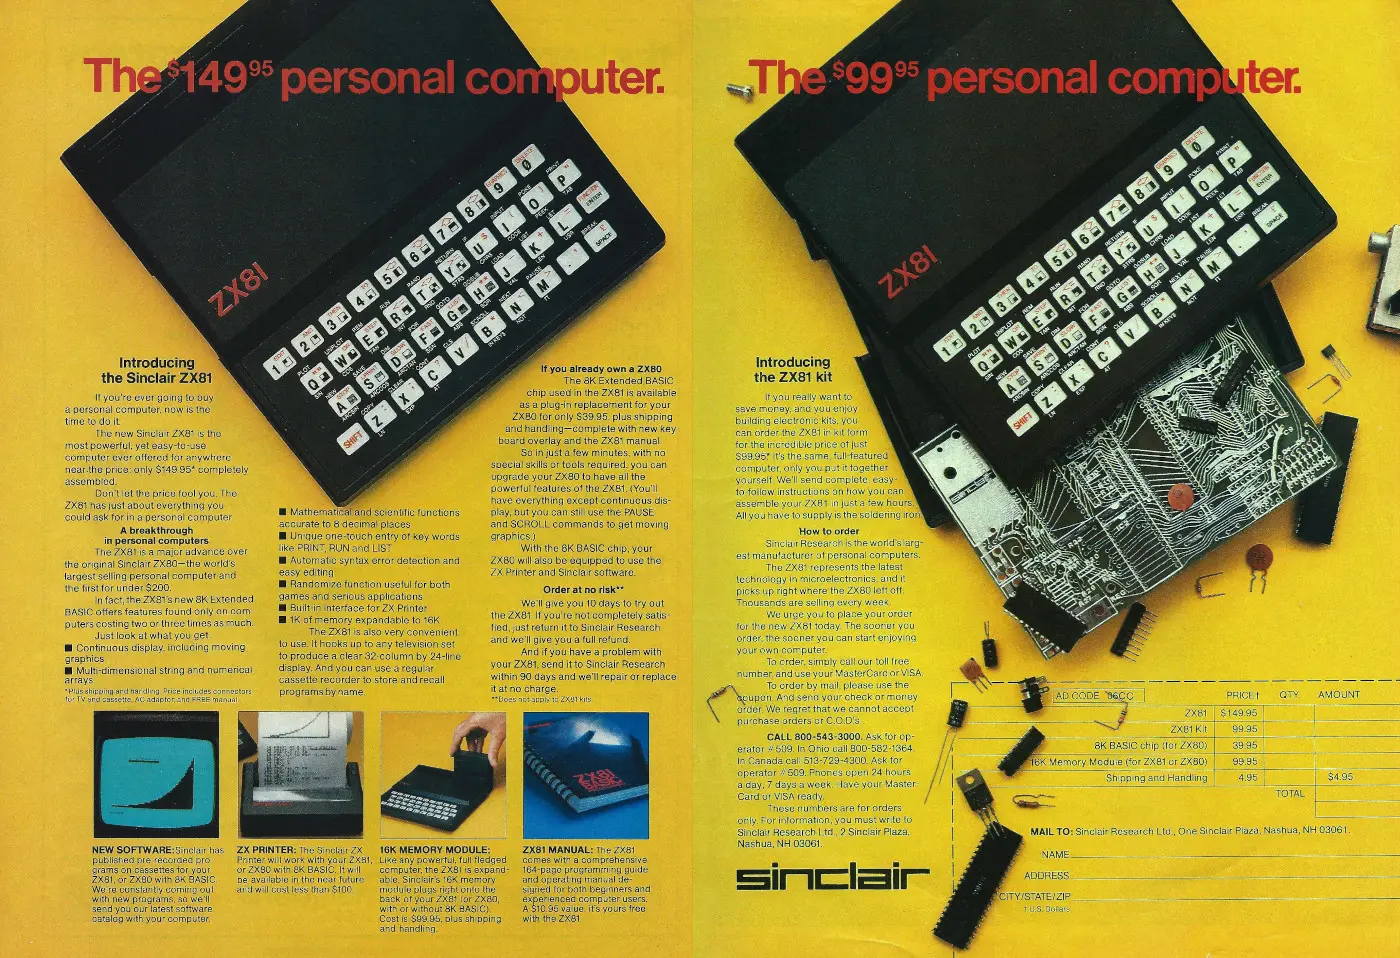 Sinclair Advert: The $149.95 Personal Computer: Introducing the Sinclair ZX81, from Unknown, August 1981